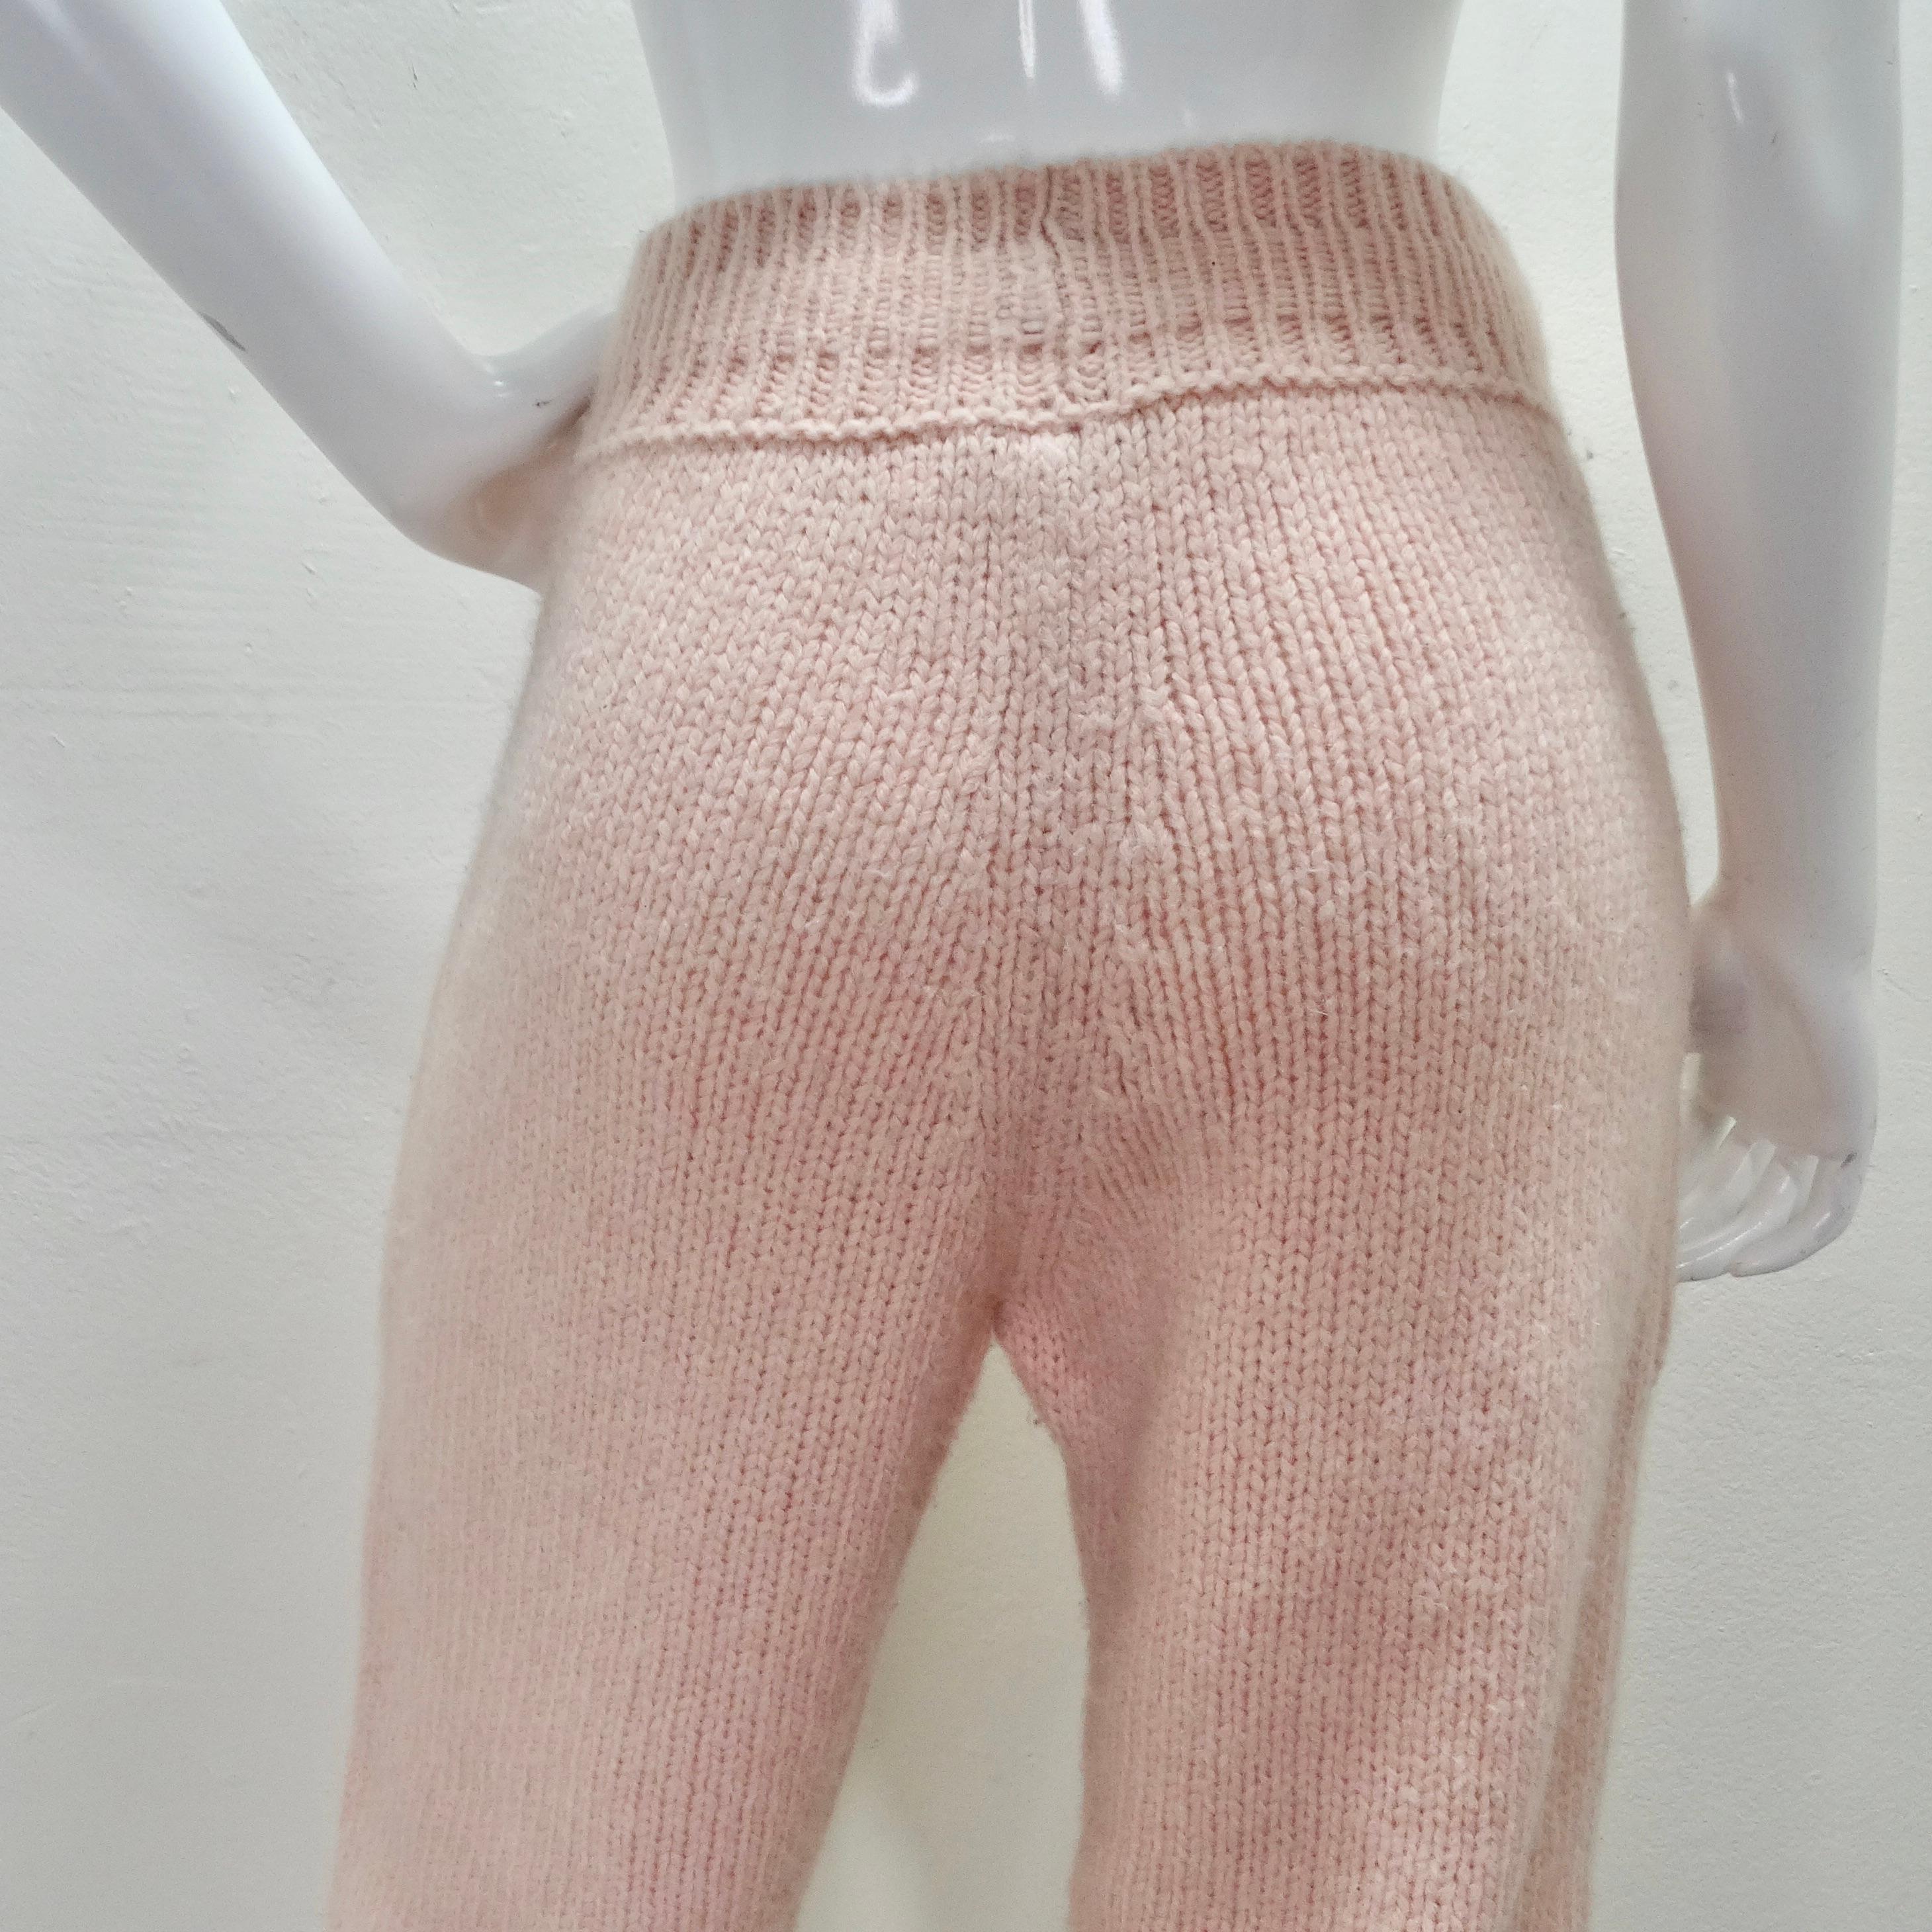 Do not miss out on the Chanel Pre Fall 2021 Pink Alpaca Knit Jogger Sweatpants, a blend of comfort, practicality, and subtle luxury that embodies Chanel's timeless elegance. These jogger-style sweatpants are crafted from a cozy alpaca knit in a